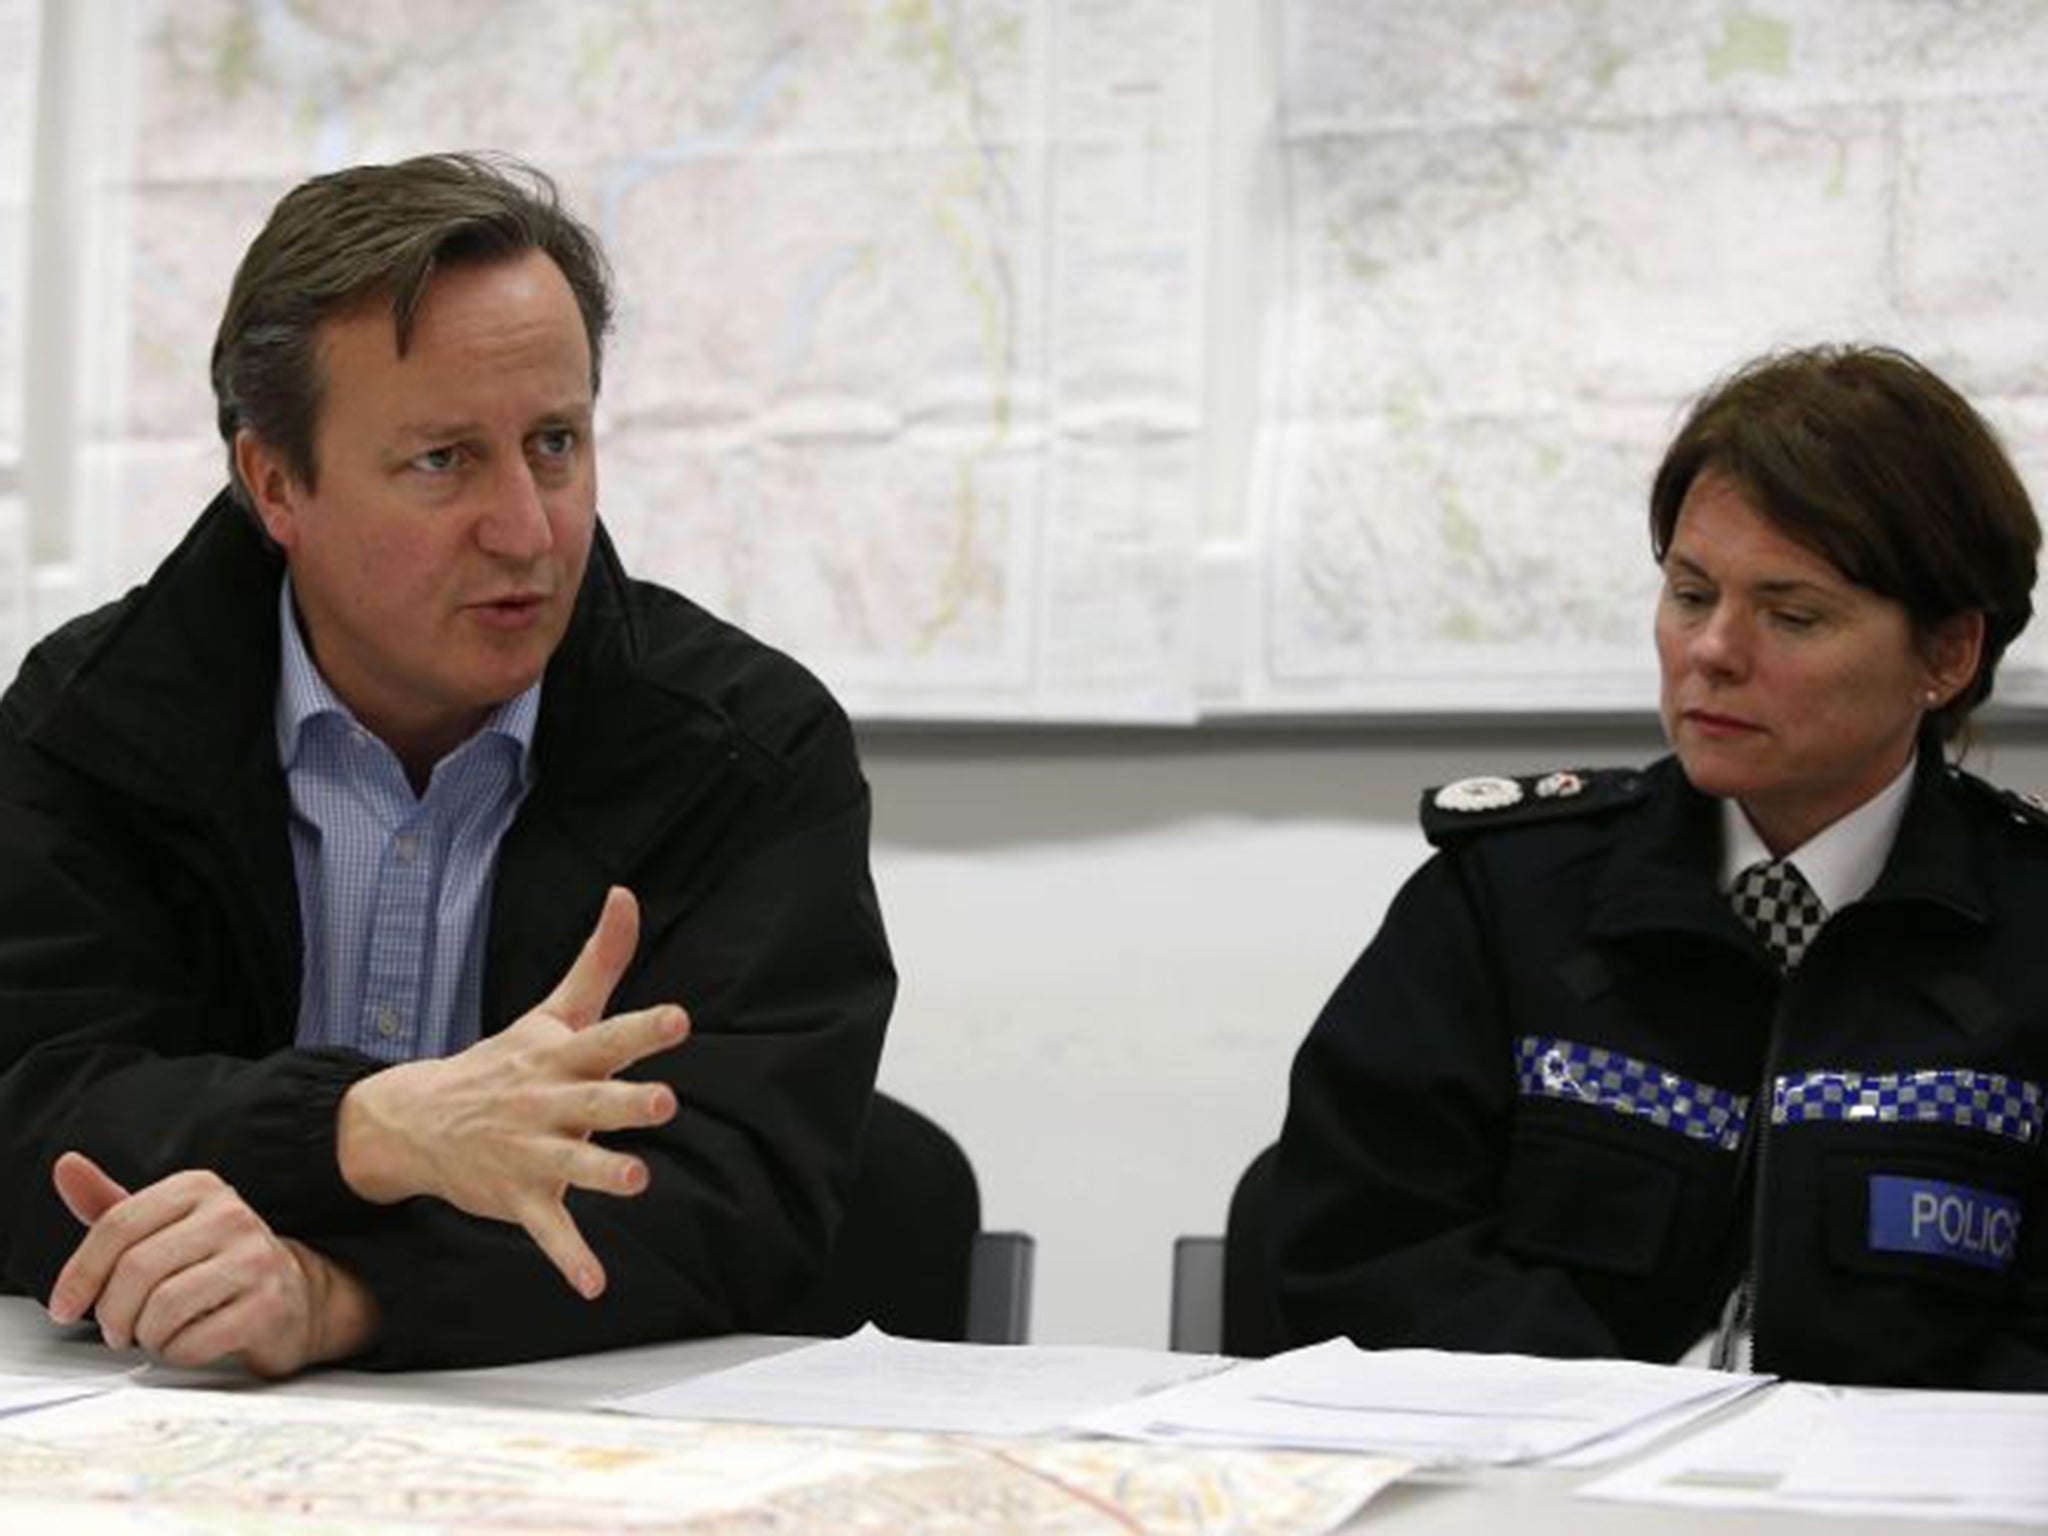 Prime Minister David Cameron attends a meeting of flood rescue services at police headquarters in Carlisle